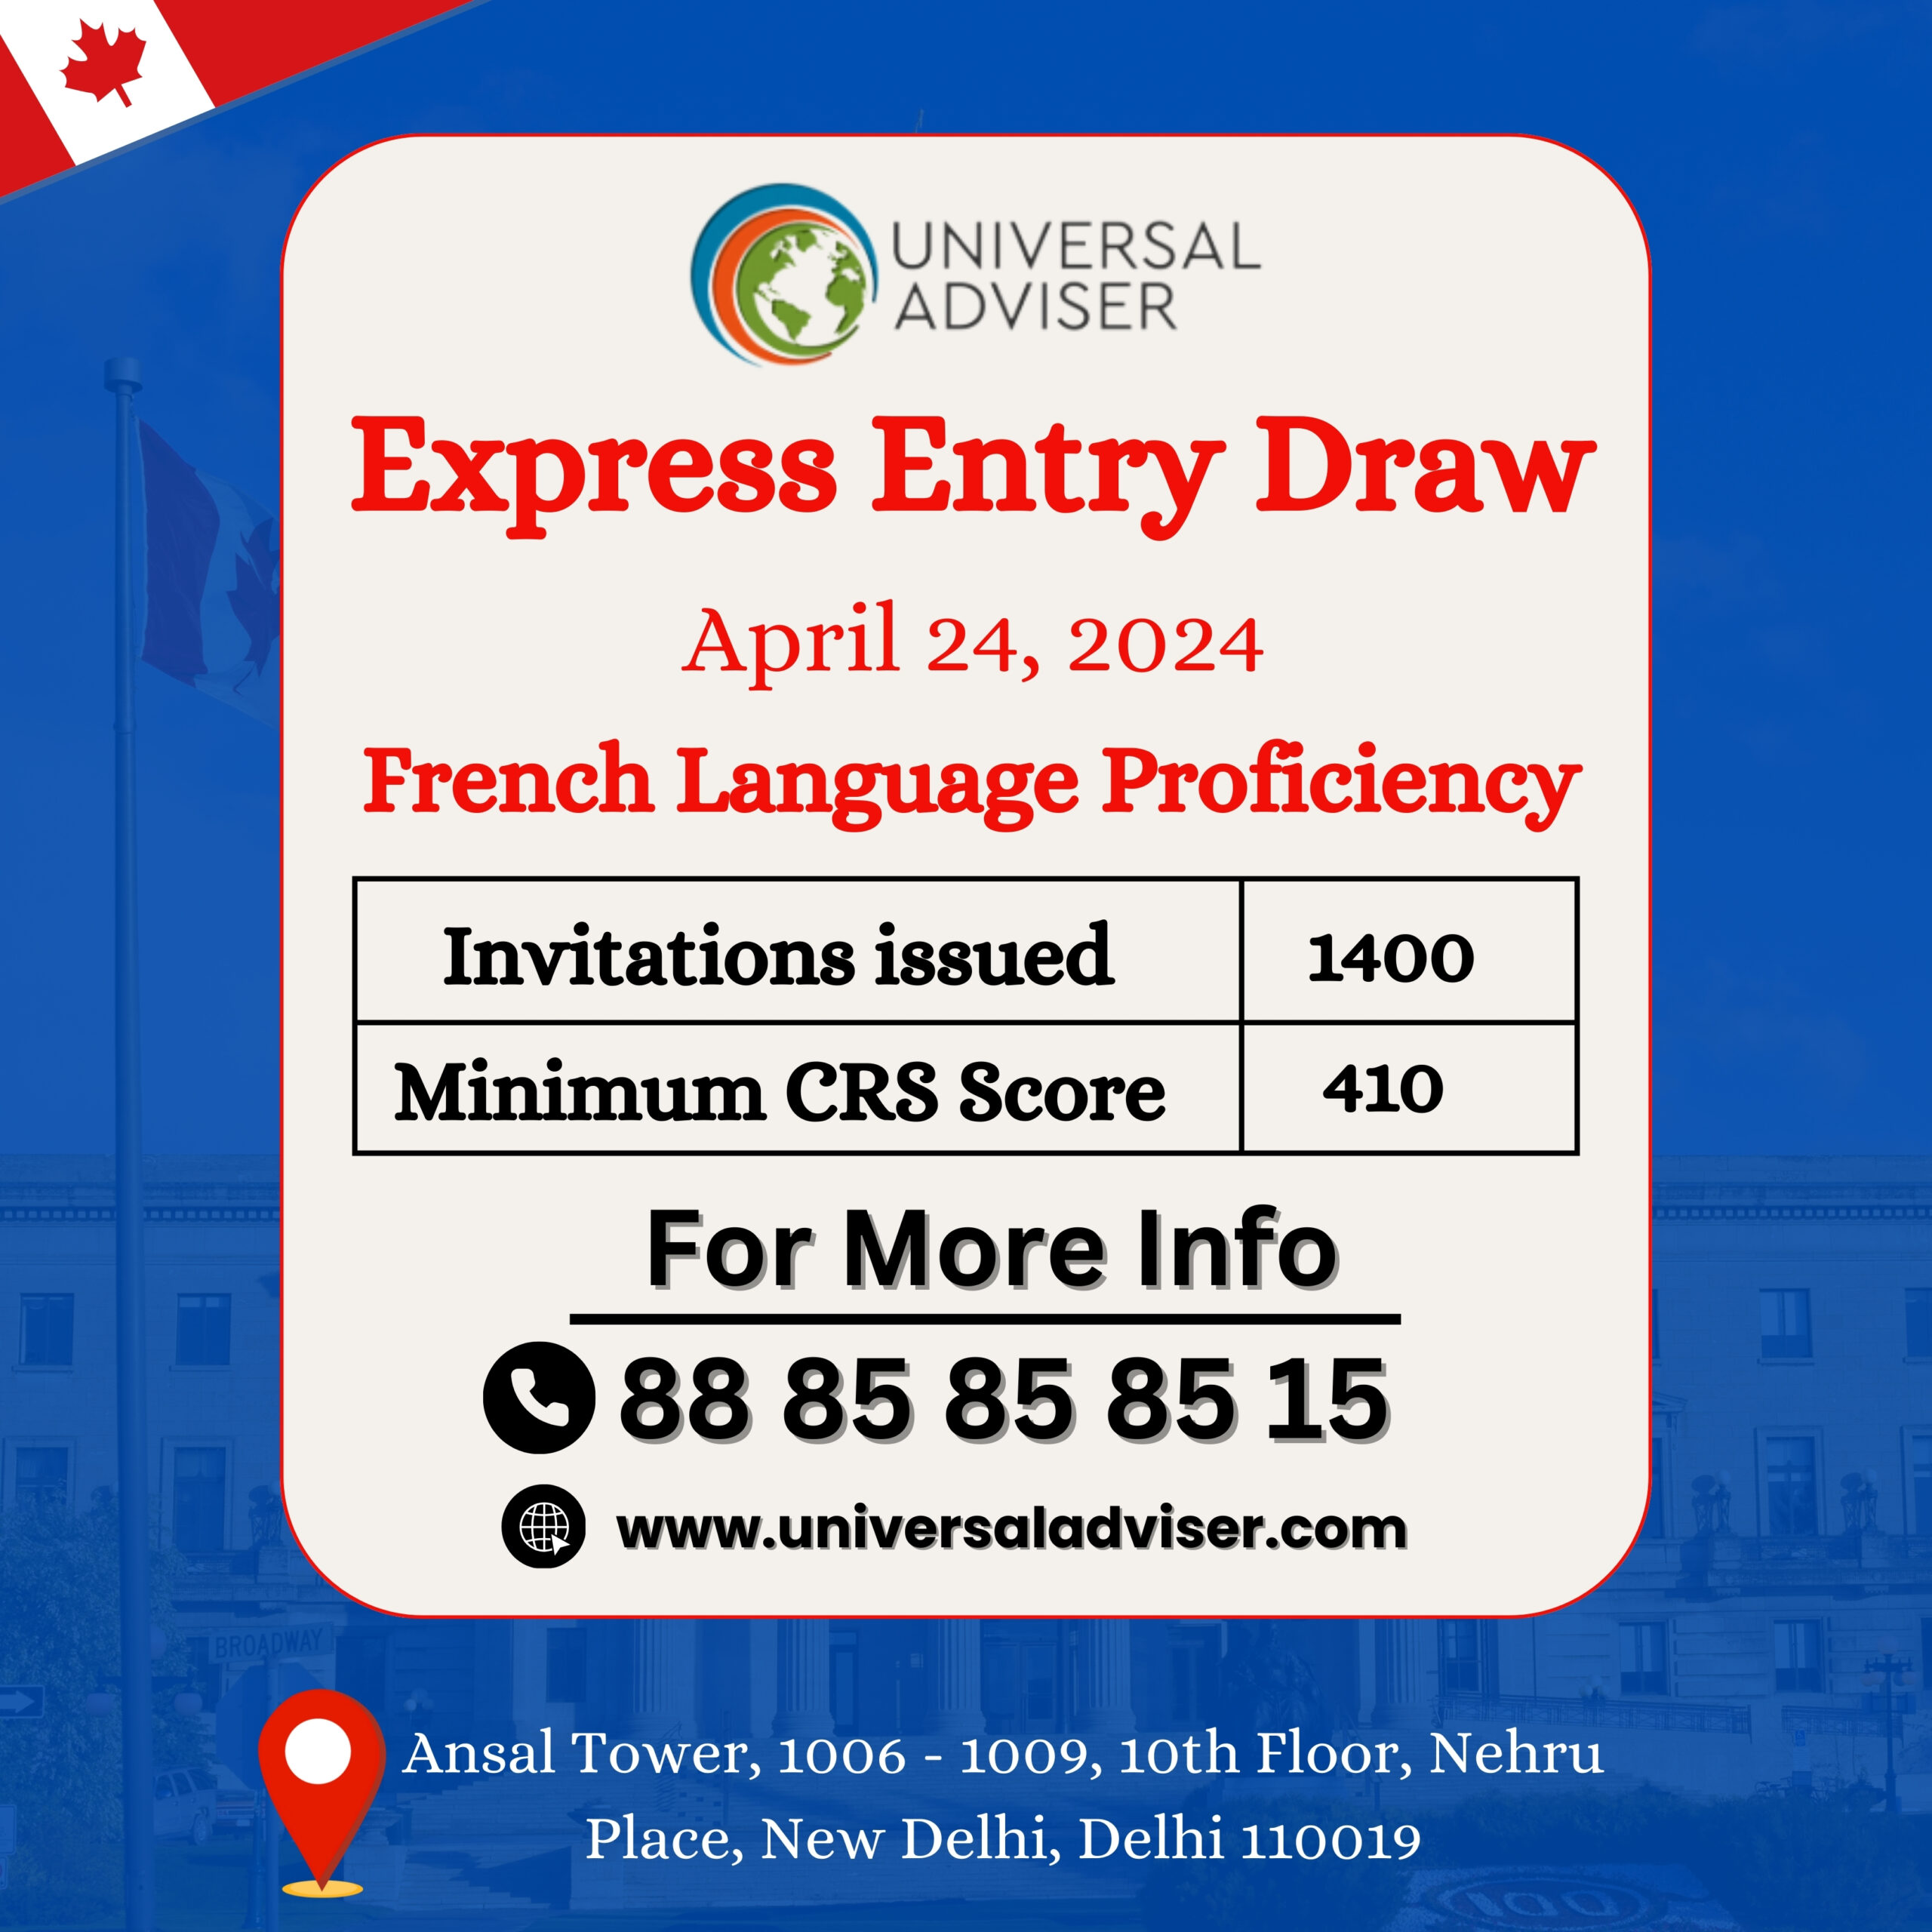 IRCC Holds Second Express Entry Draw, French Language Proficiency